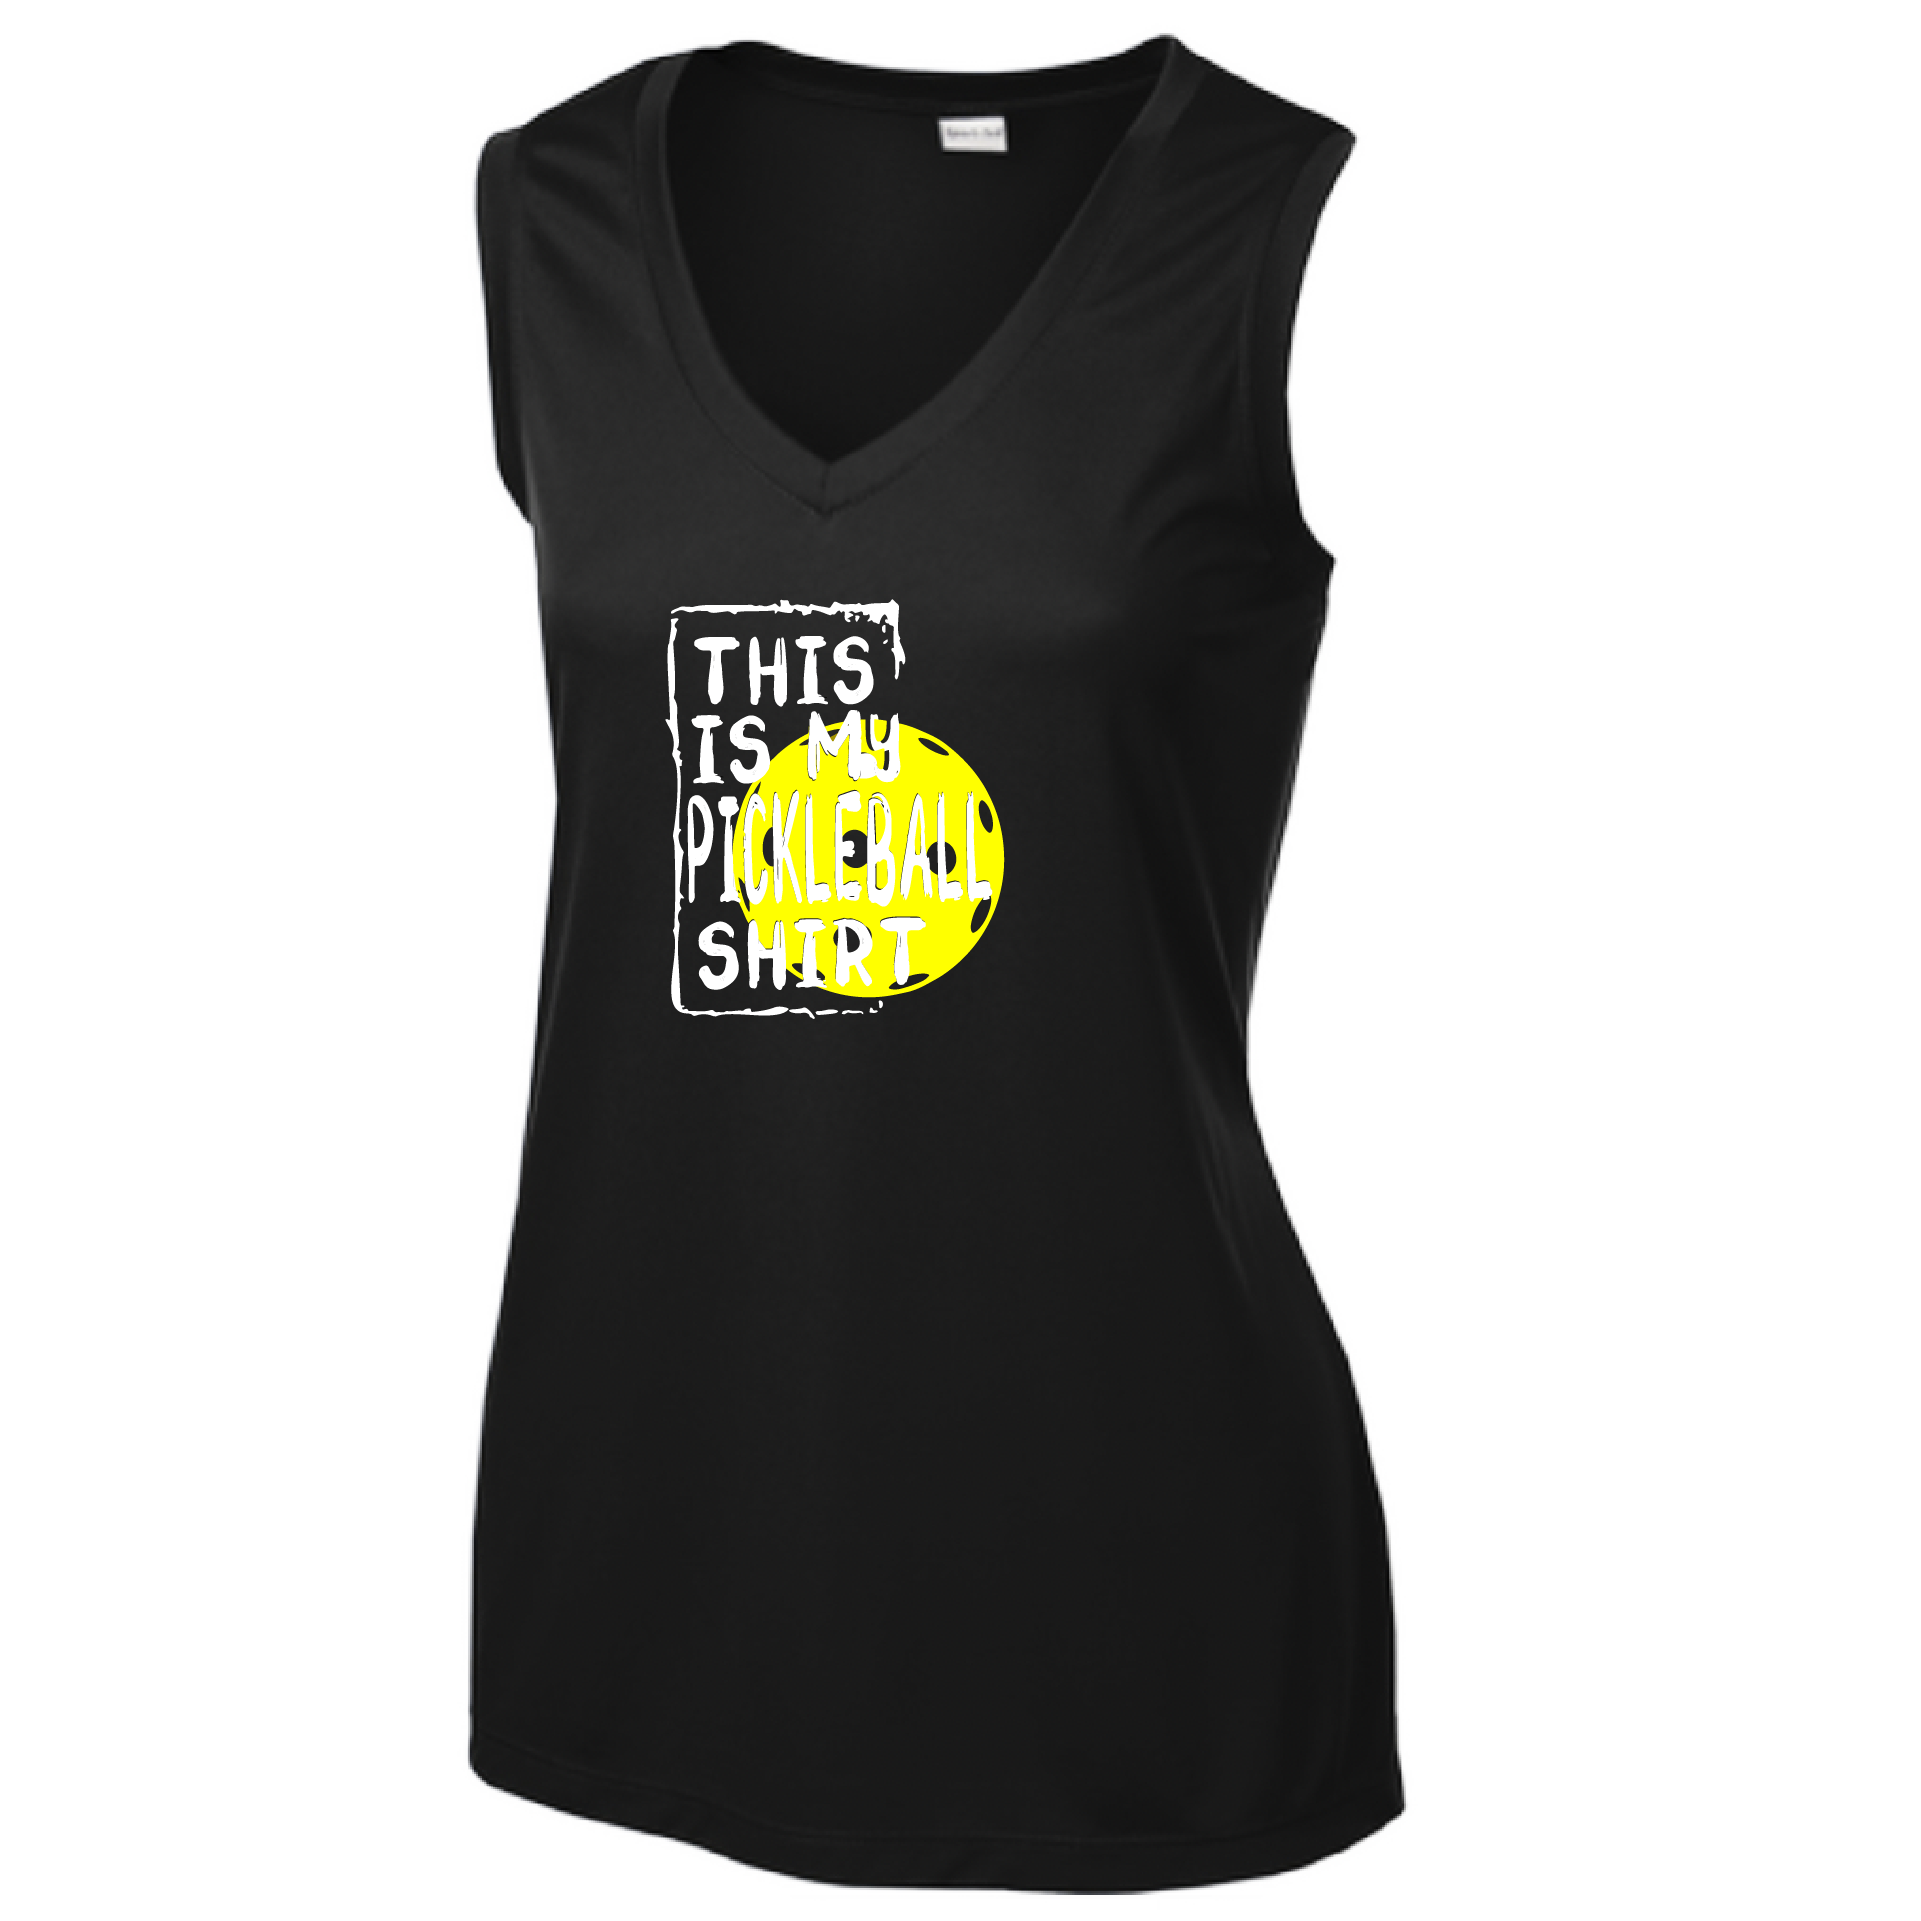 Pickleball Design: This is my Pickleball Shirt  Women's Style: Sleeveless Tank  Turn up the volume in this Women's shirt with its perfect mix of softness and attitude. Material is ultra-comfortable with moisture wicking properties and tri-blend softness. PosiCharge technology locks in color. Highly breathable and lightweight.